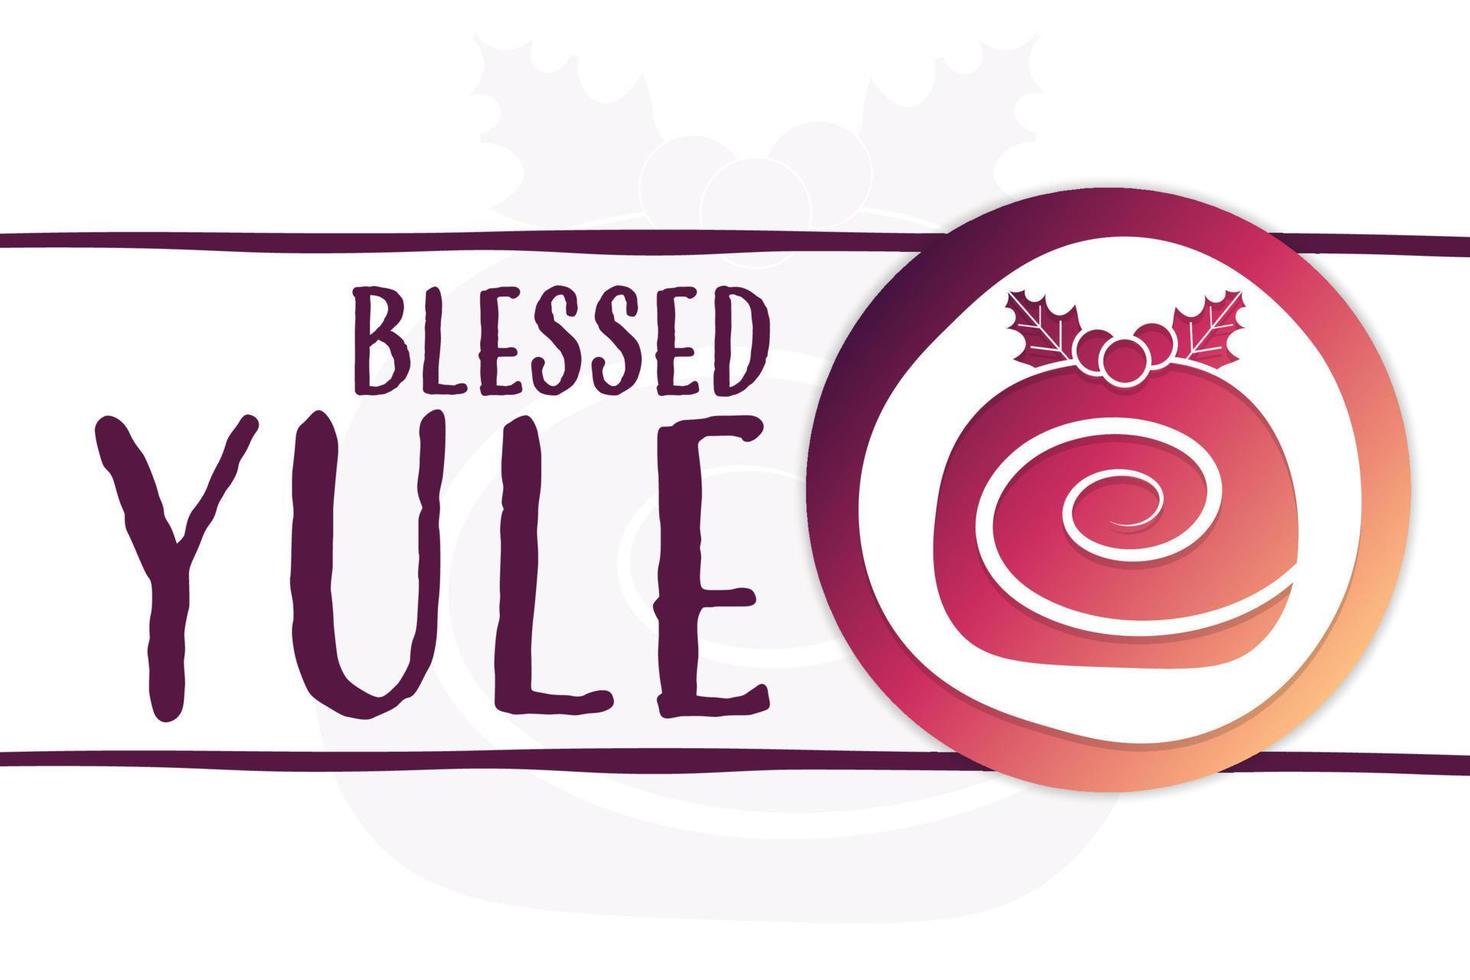 Blessed Yule. Holiday concept. Template for background, banner, card, poster with text inscription. Vector EPS10 illustration.